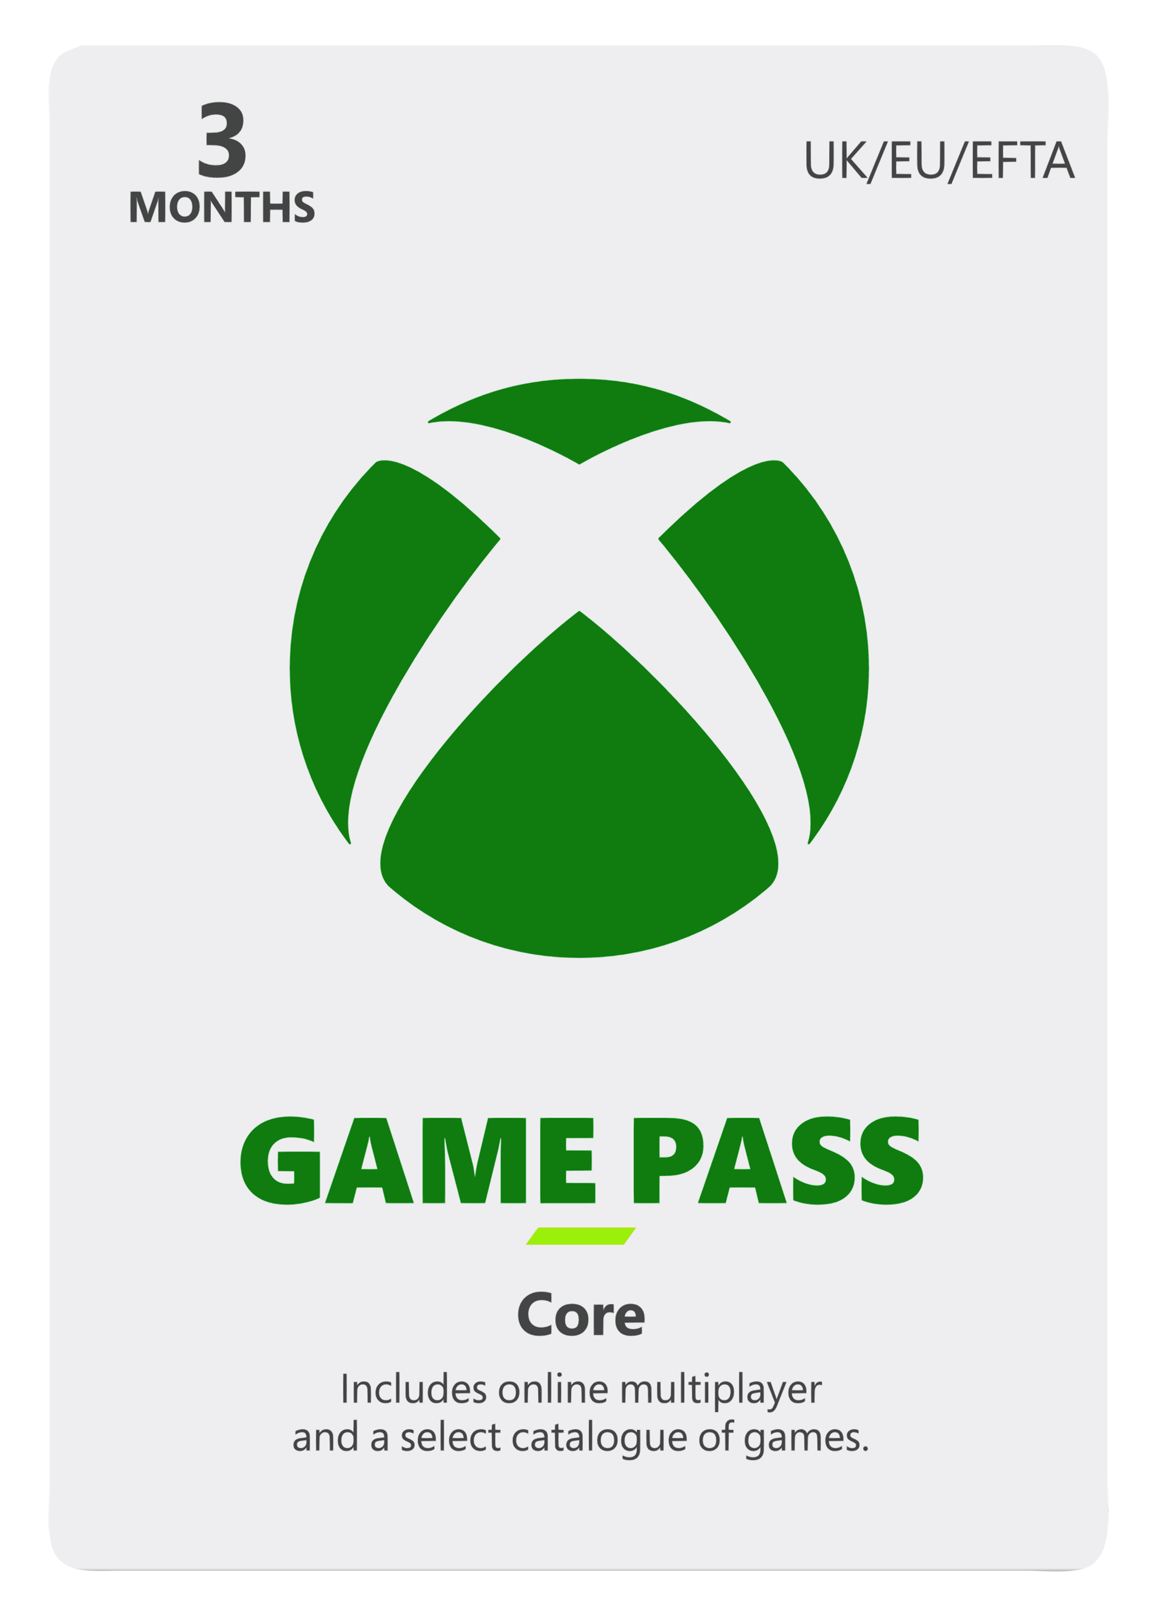 Buy Xbox Game Pass Ultimate - 1 Month EUROPE Xbox One / PC Xbox Key 